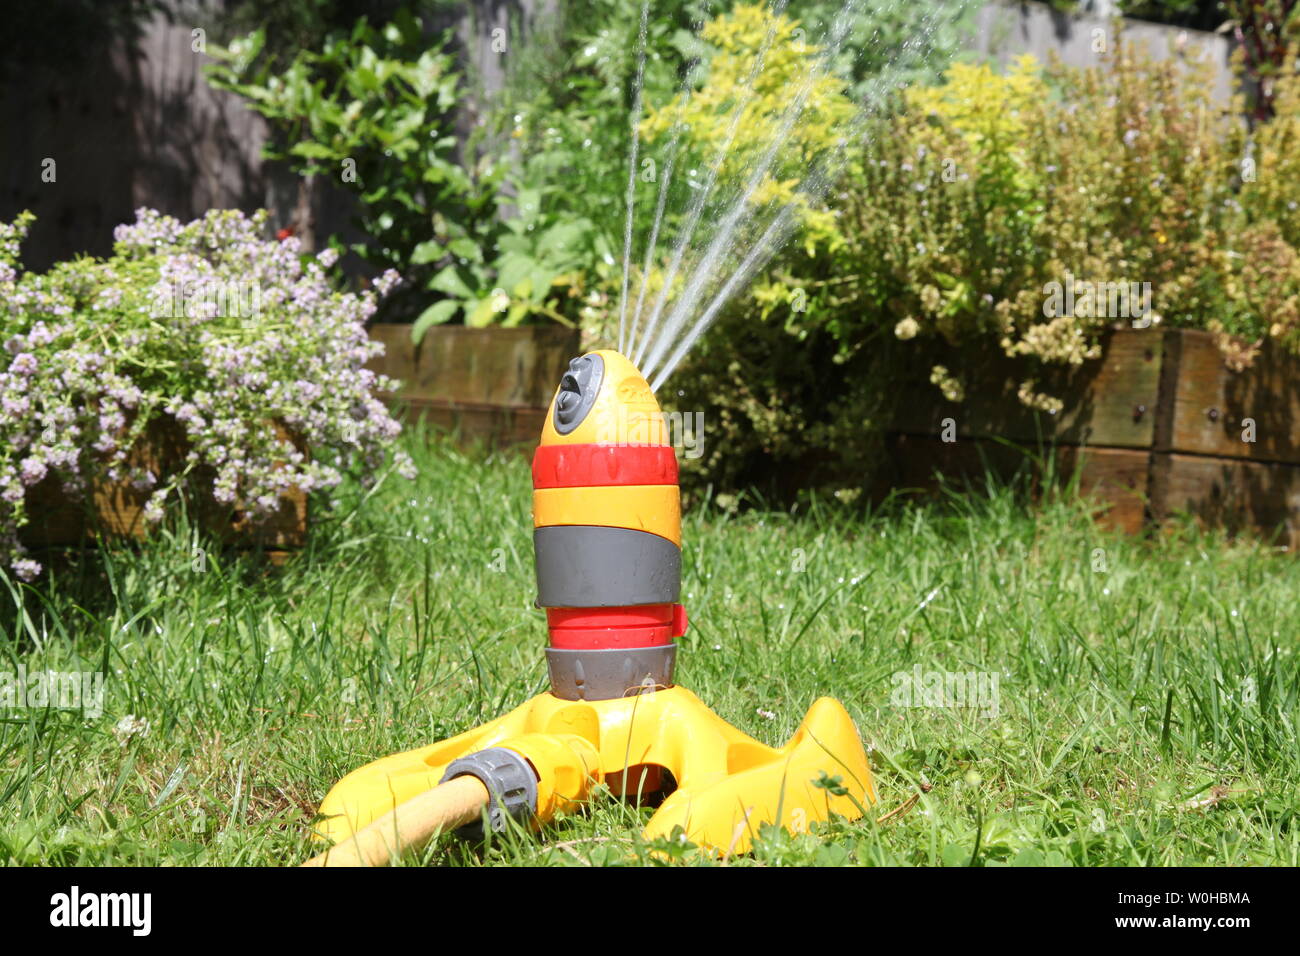 Hozelock sprinkler head attached to hose spraying water onto herbs and lawn on a summers day in a British garden with plants in background Stock Photo